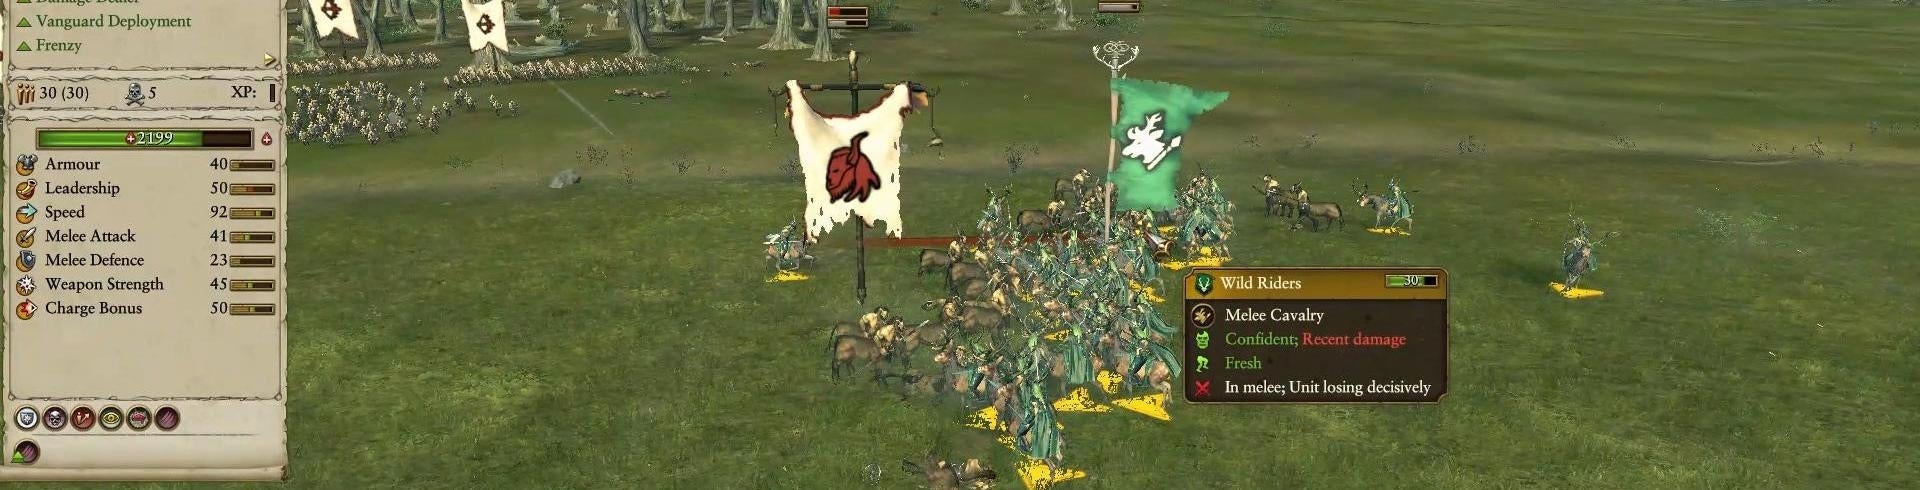 Image for Watch 18 minutes of Total War: Warhammer's Wood Elves